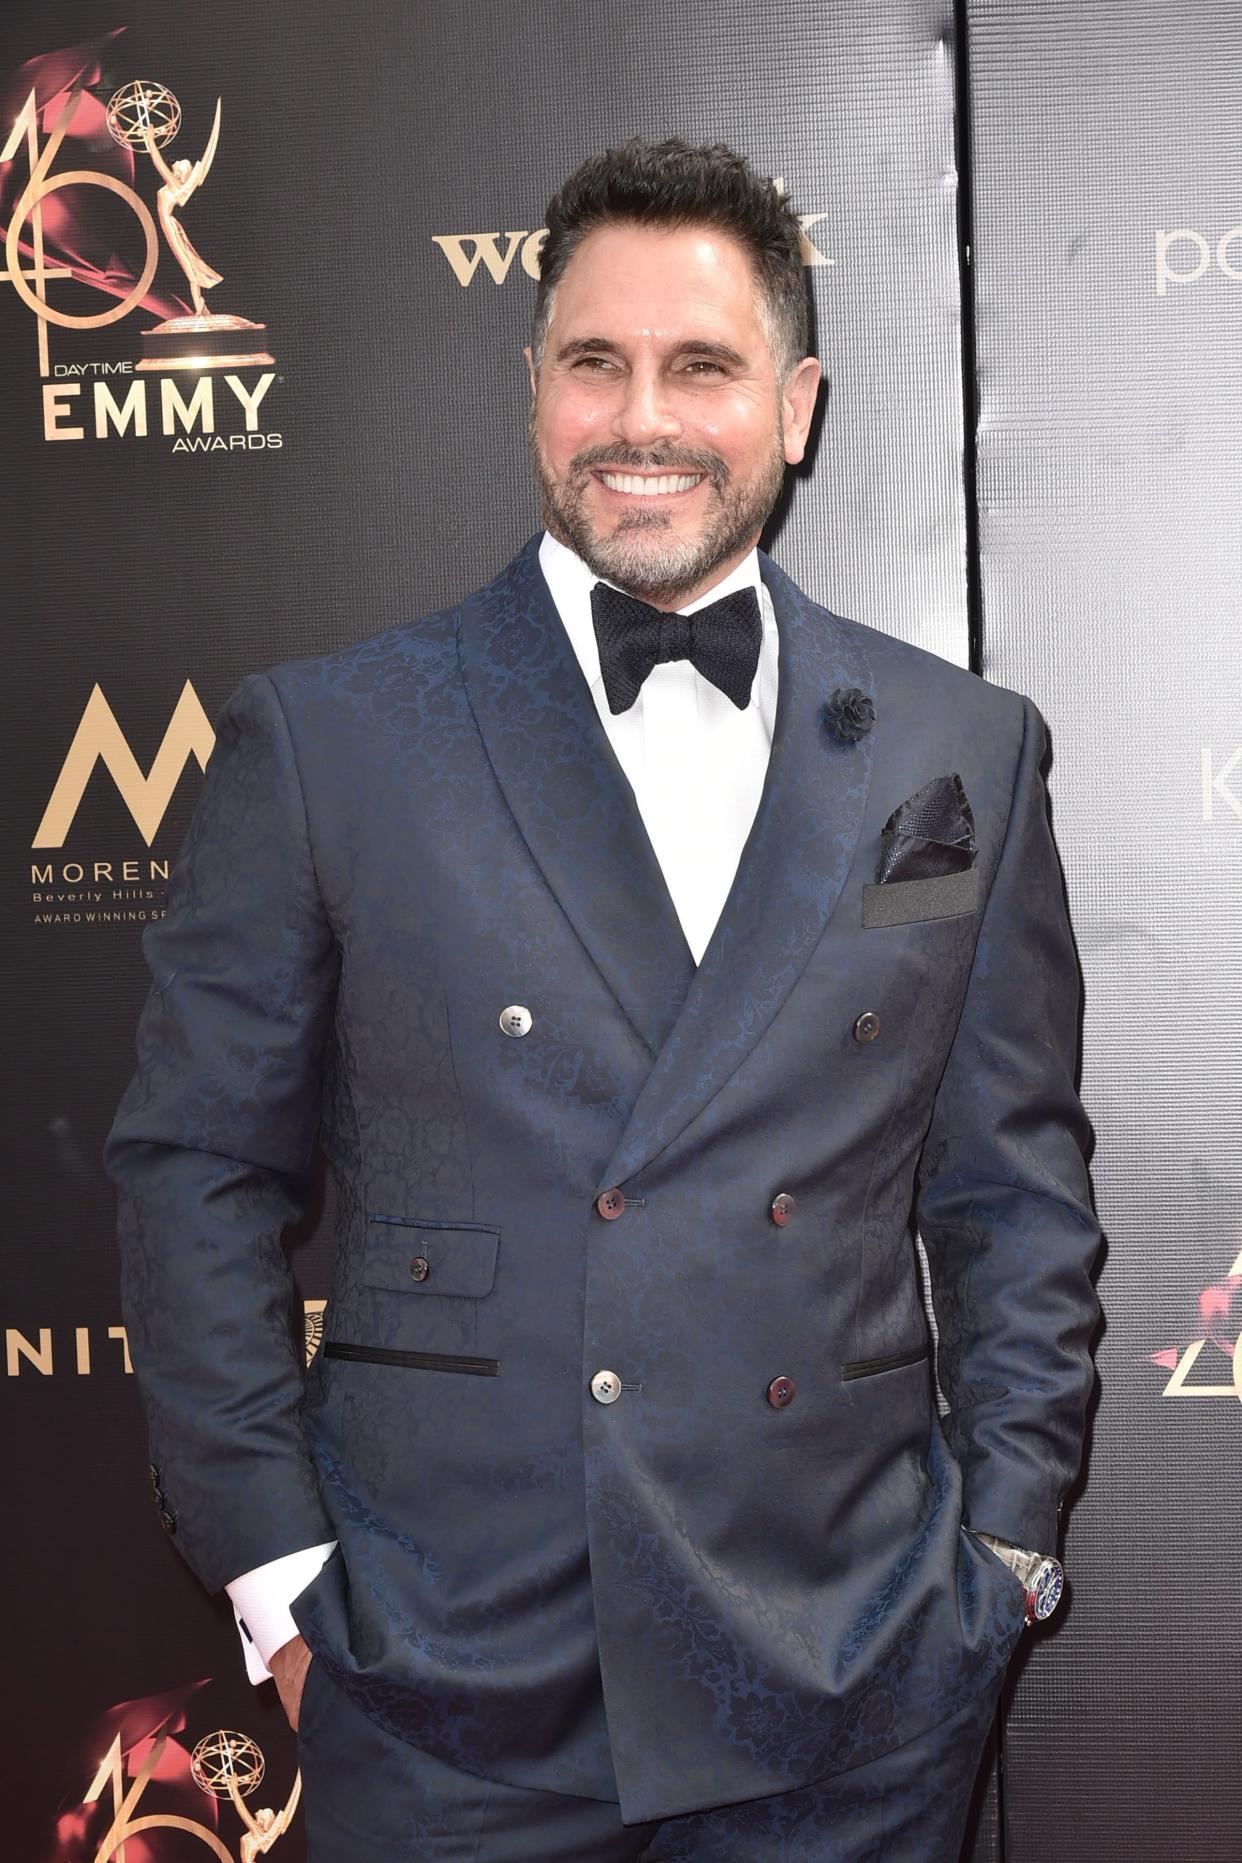 Don Diamont looks stunning in a two-piece blue suit, with a dazzling smile on his face